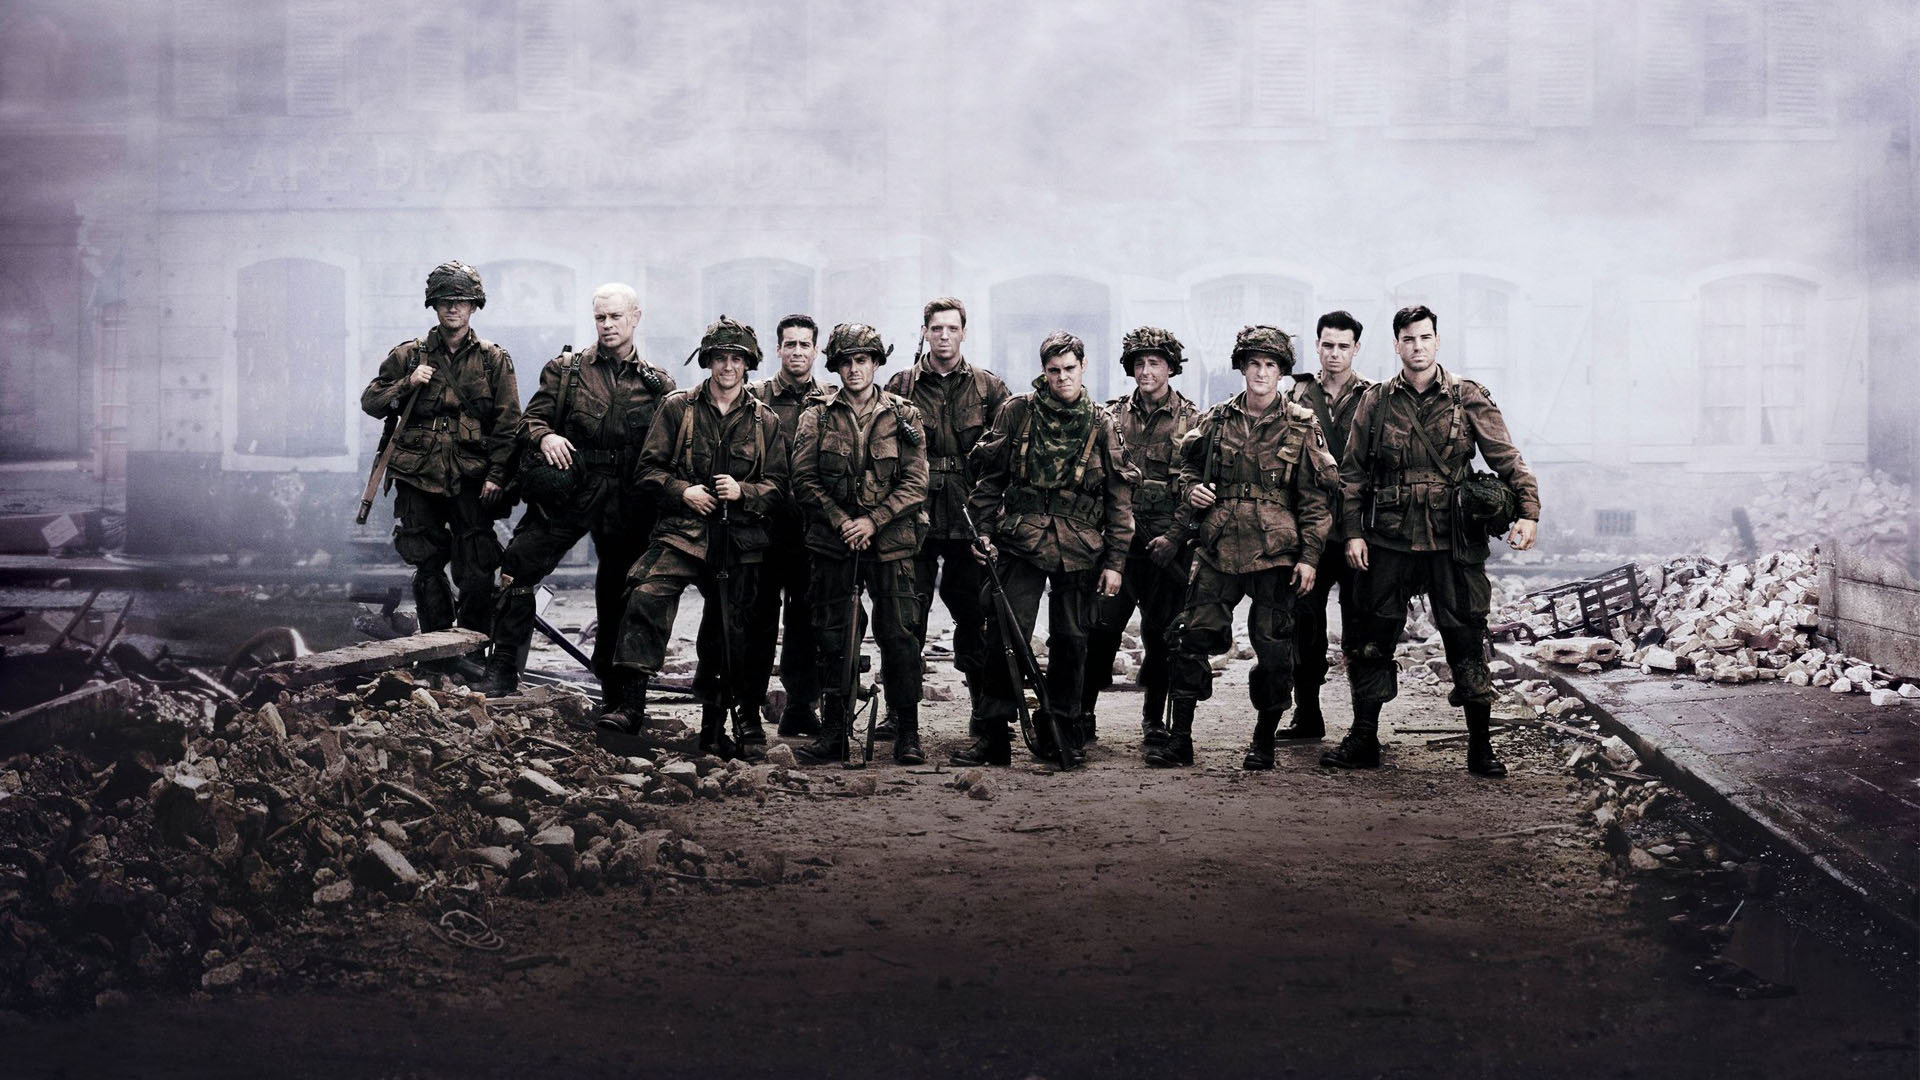 People 1920x1080 Band of Brothers World War II paratroopers